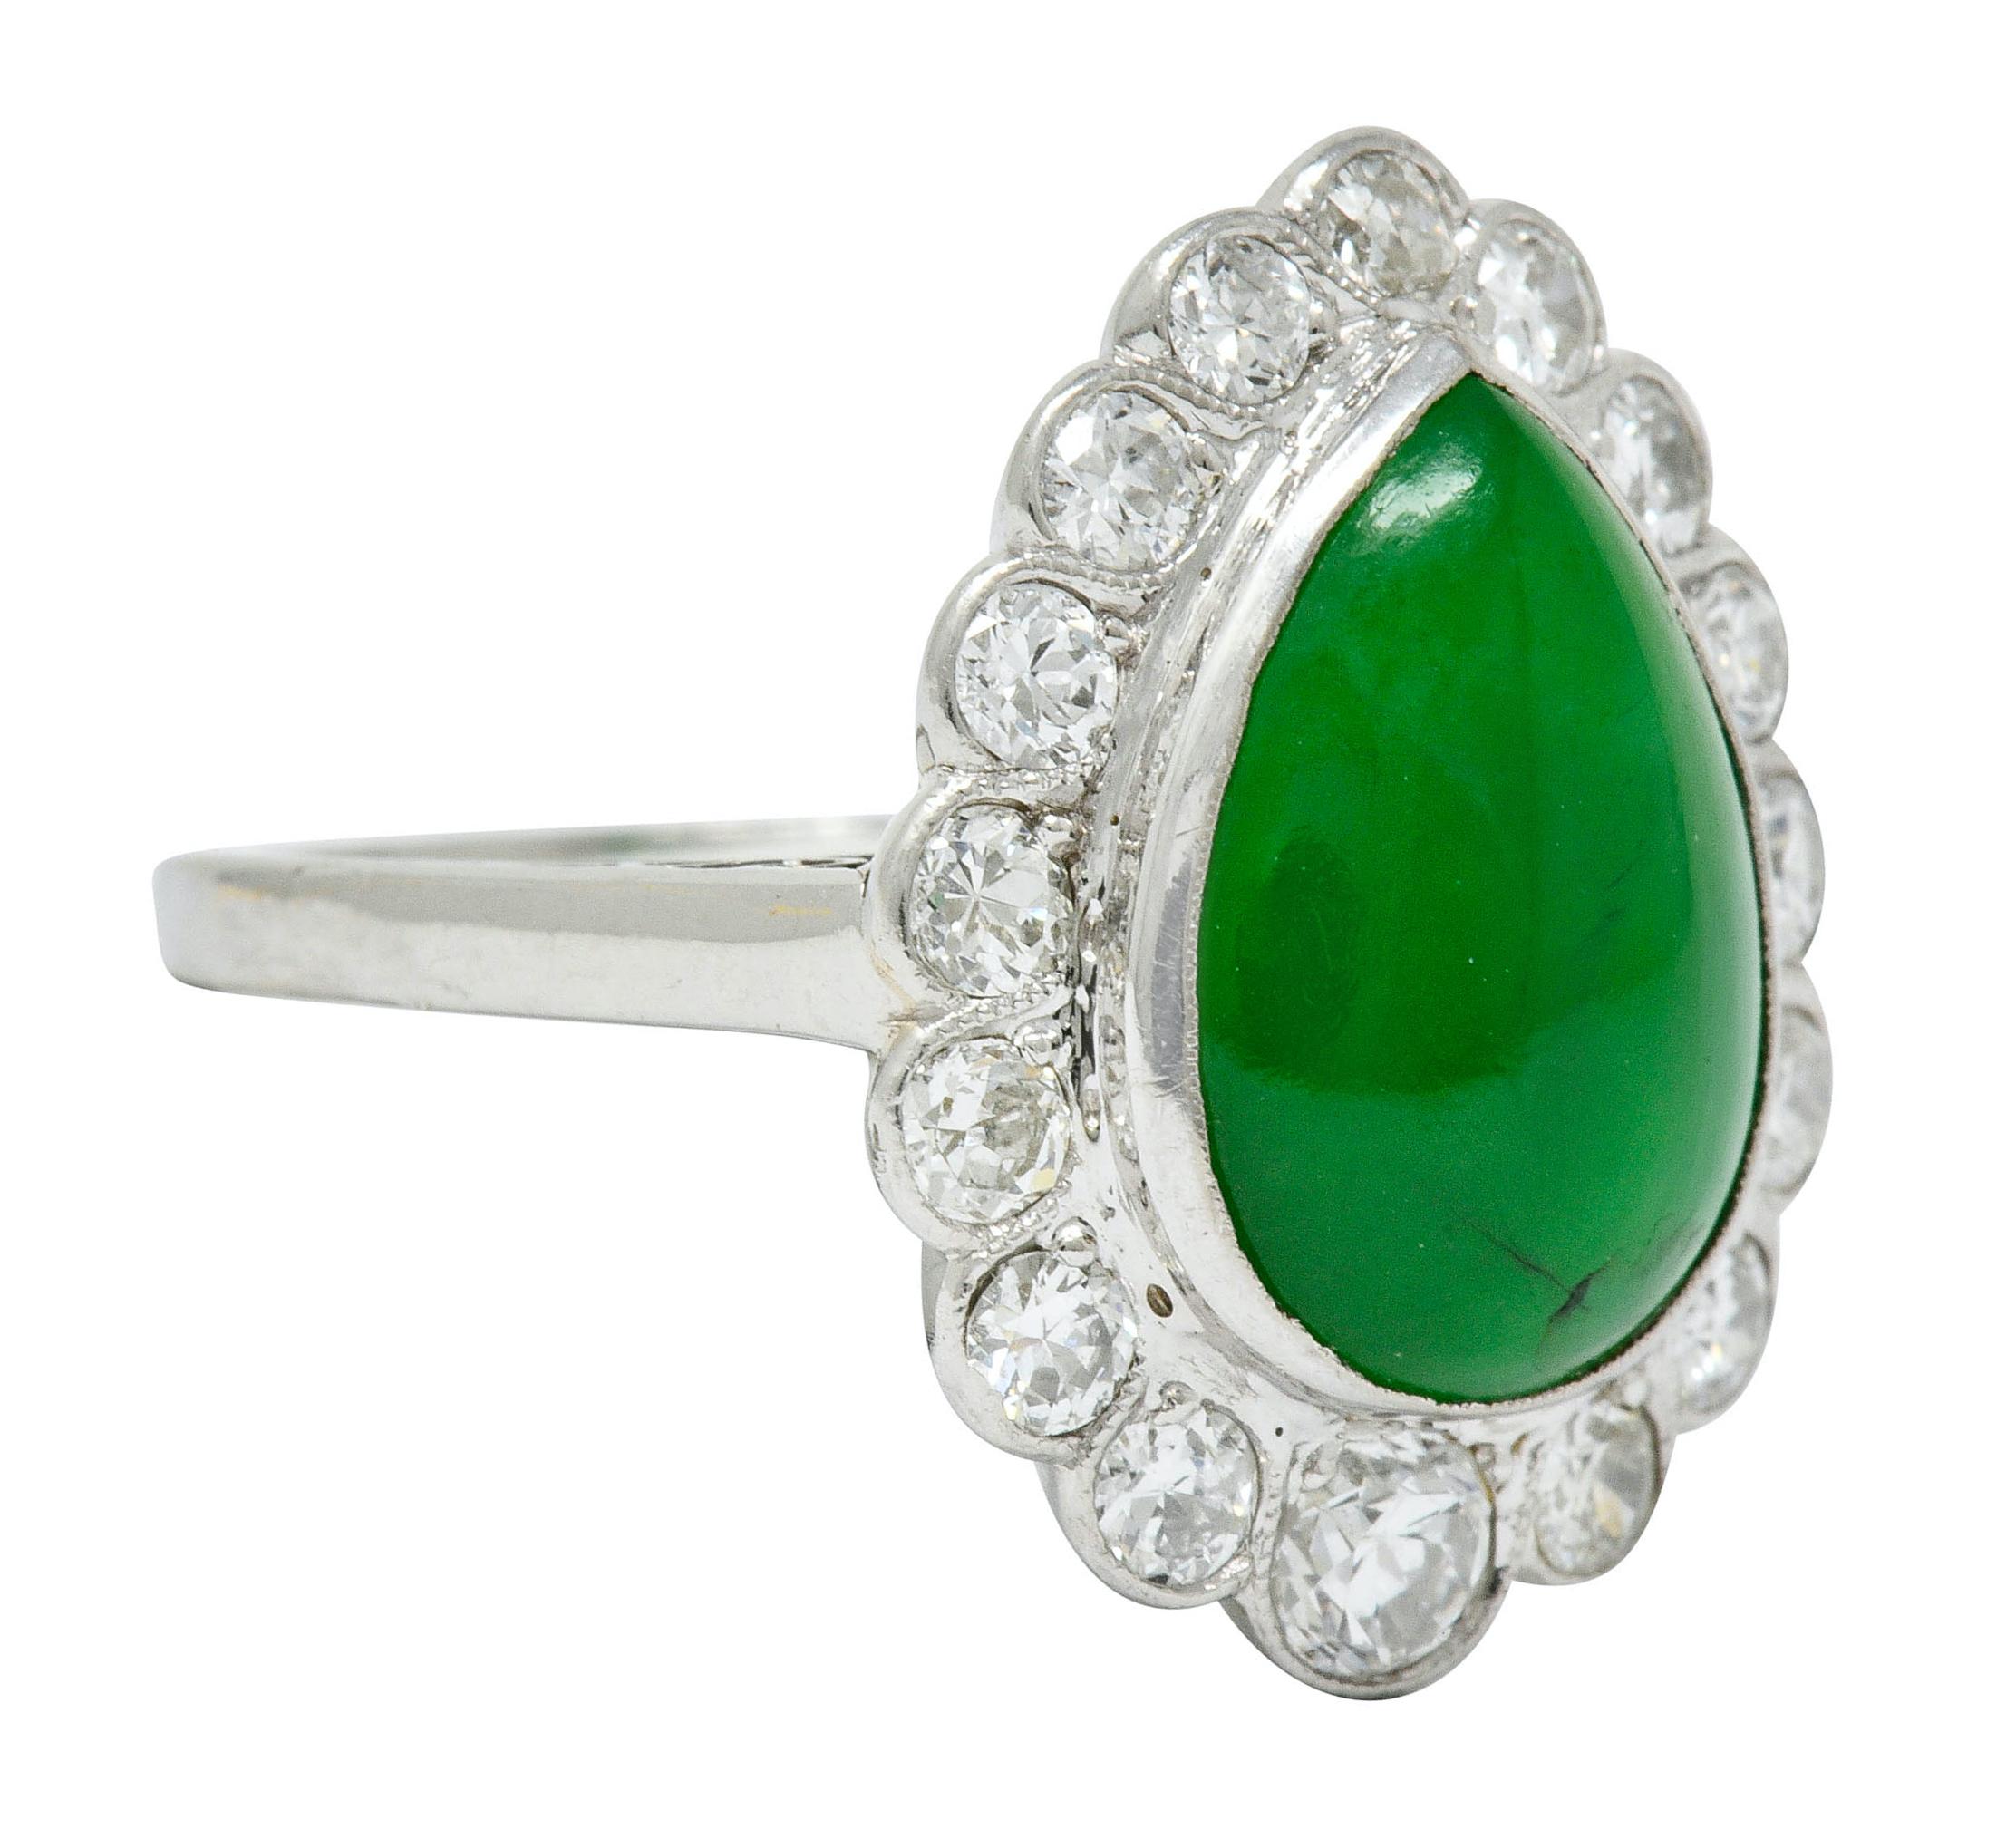 Cluster style ring centering a bezel set pear jade cabochon measuring 13.4 x 9.5 mm
Type A jadeite jade with no indication of impregnation, translucent with a deep and even green color

Surrounded by round brilliant cut diamonds weighing